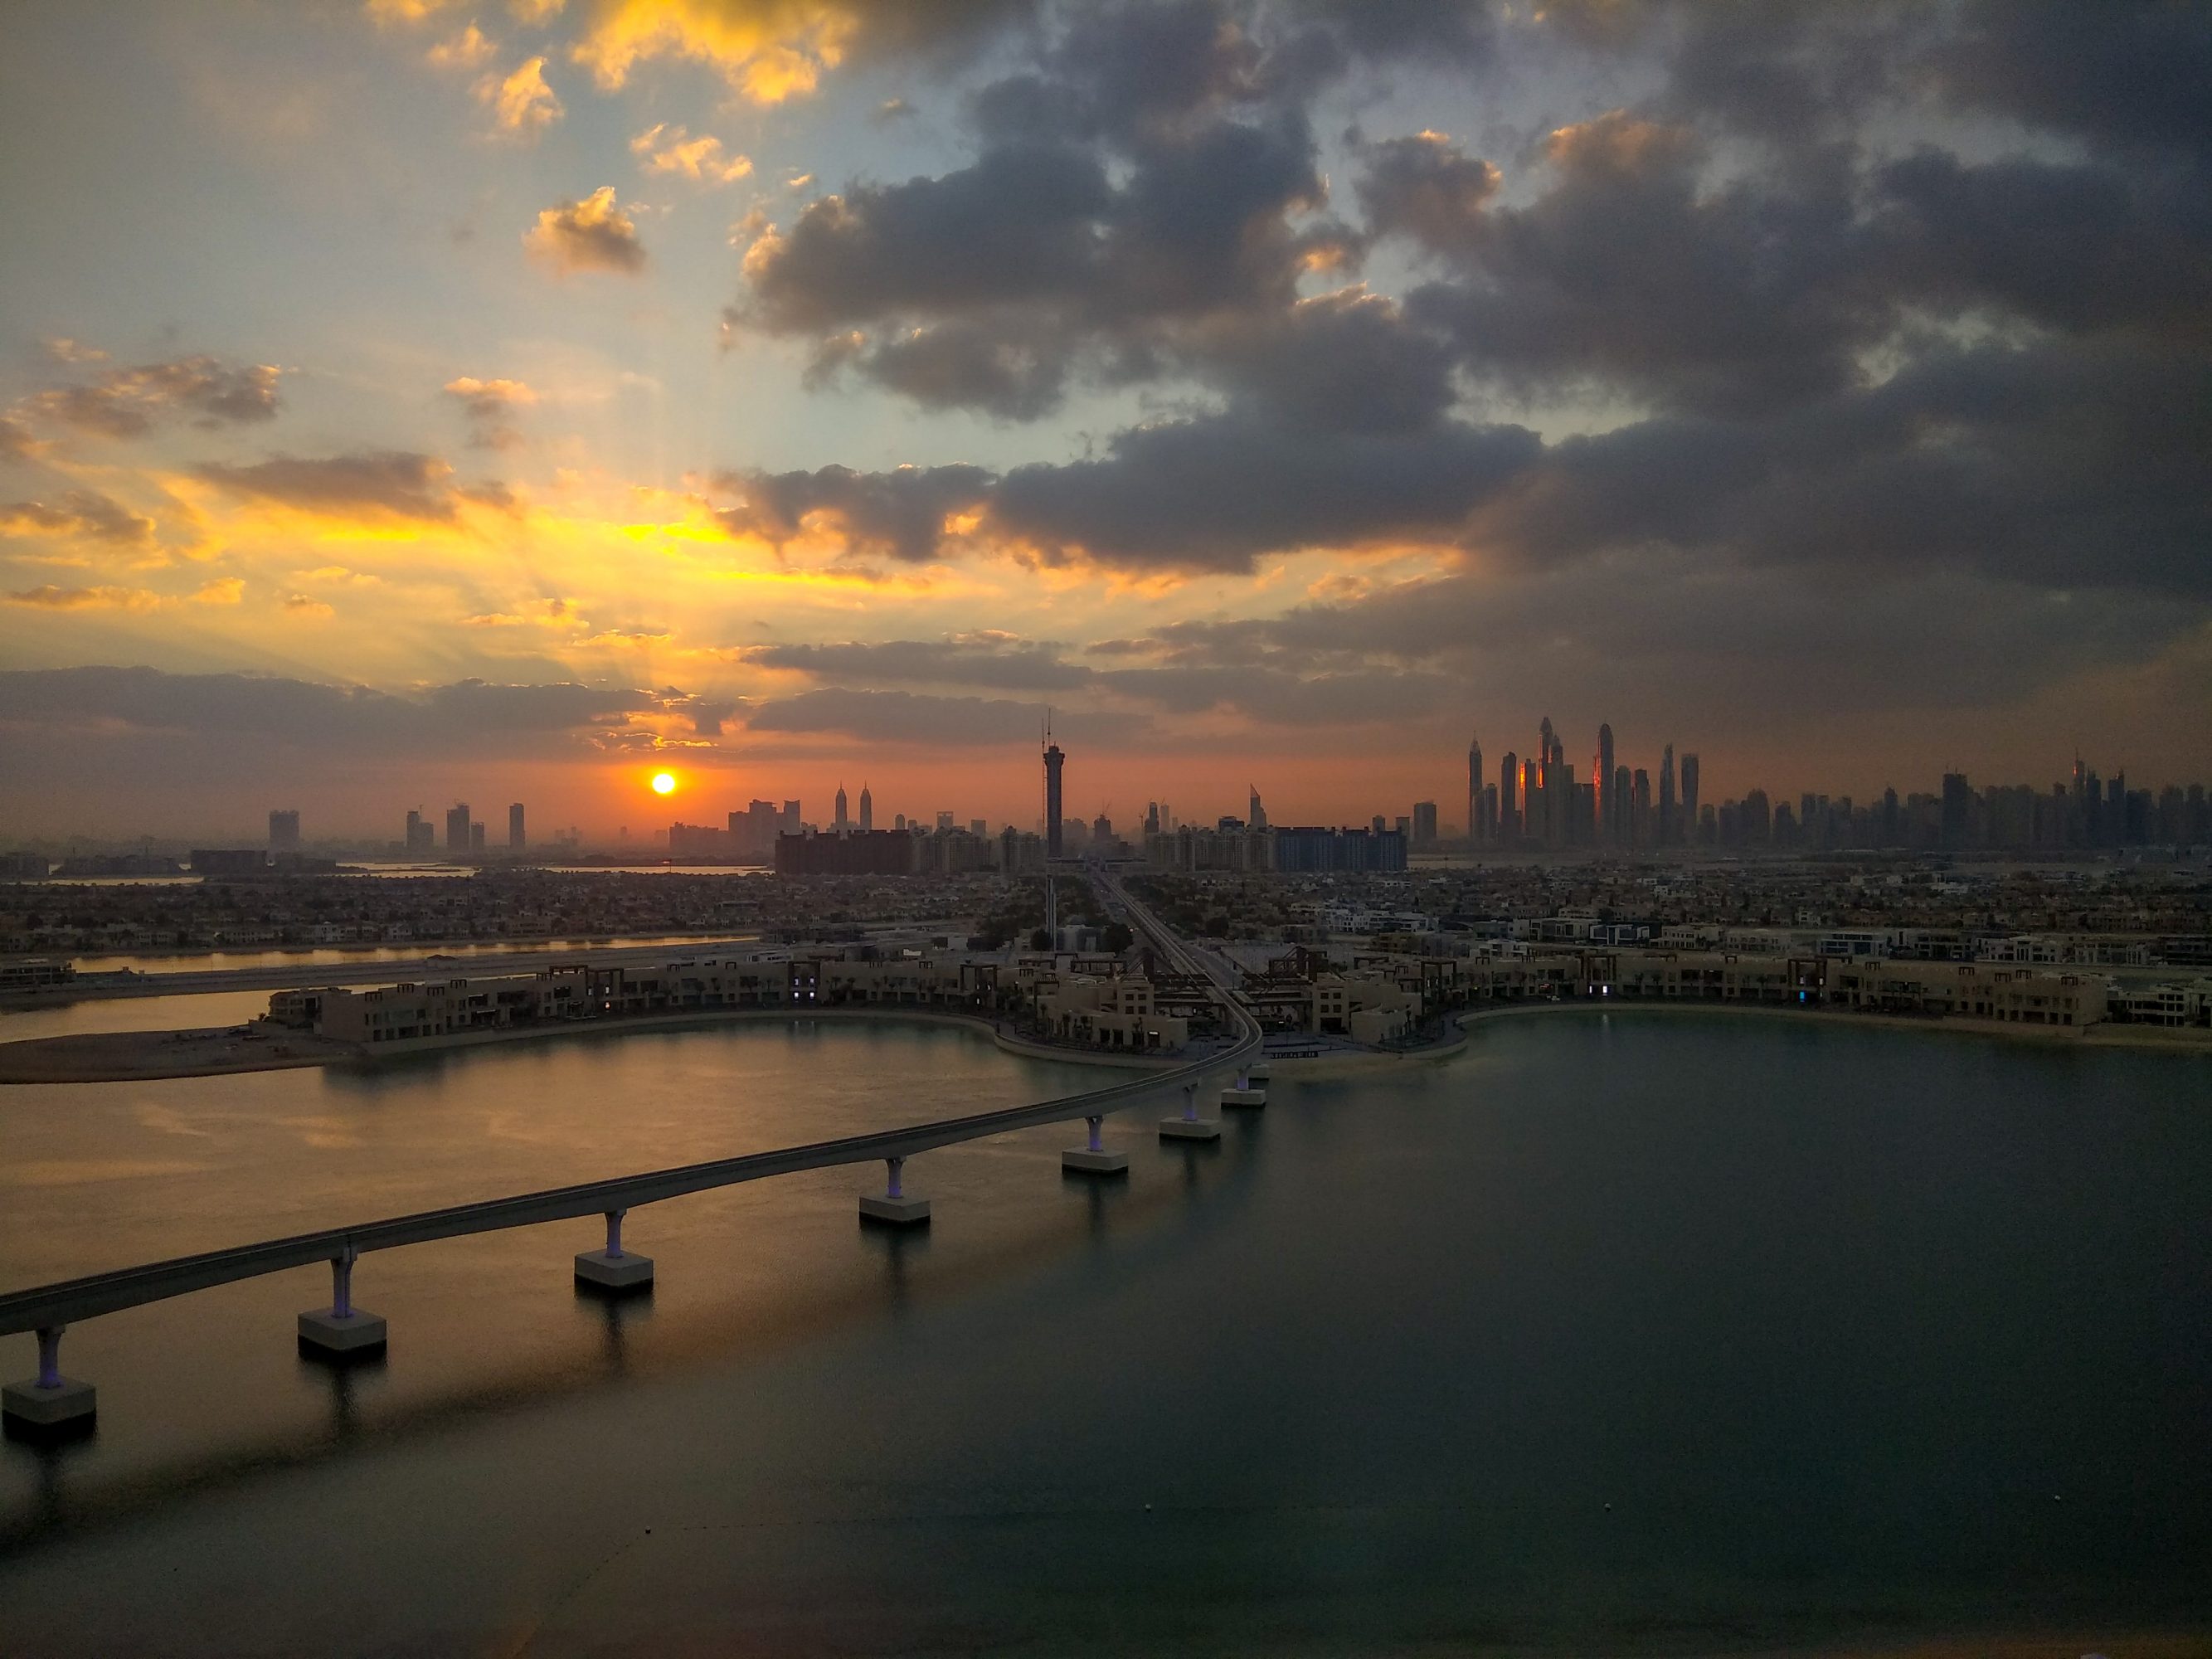 Sunrise as seen from a Imperial Club room in Atlantis the Palm